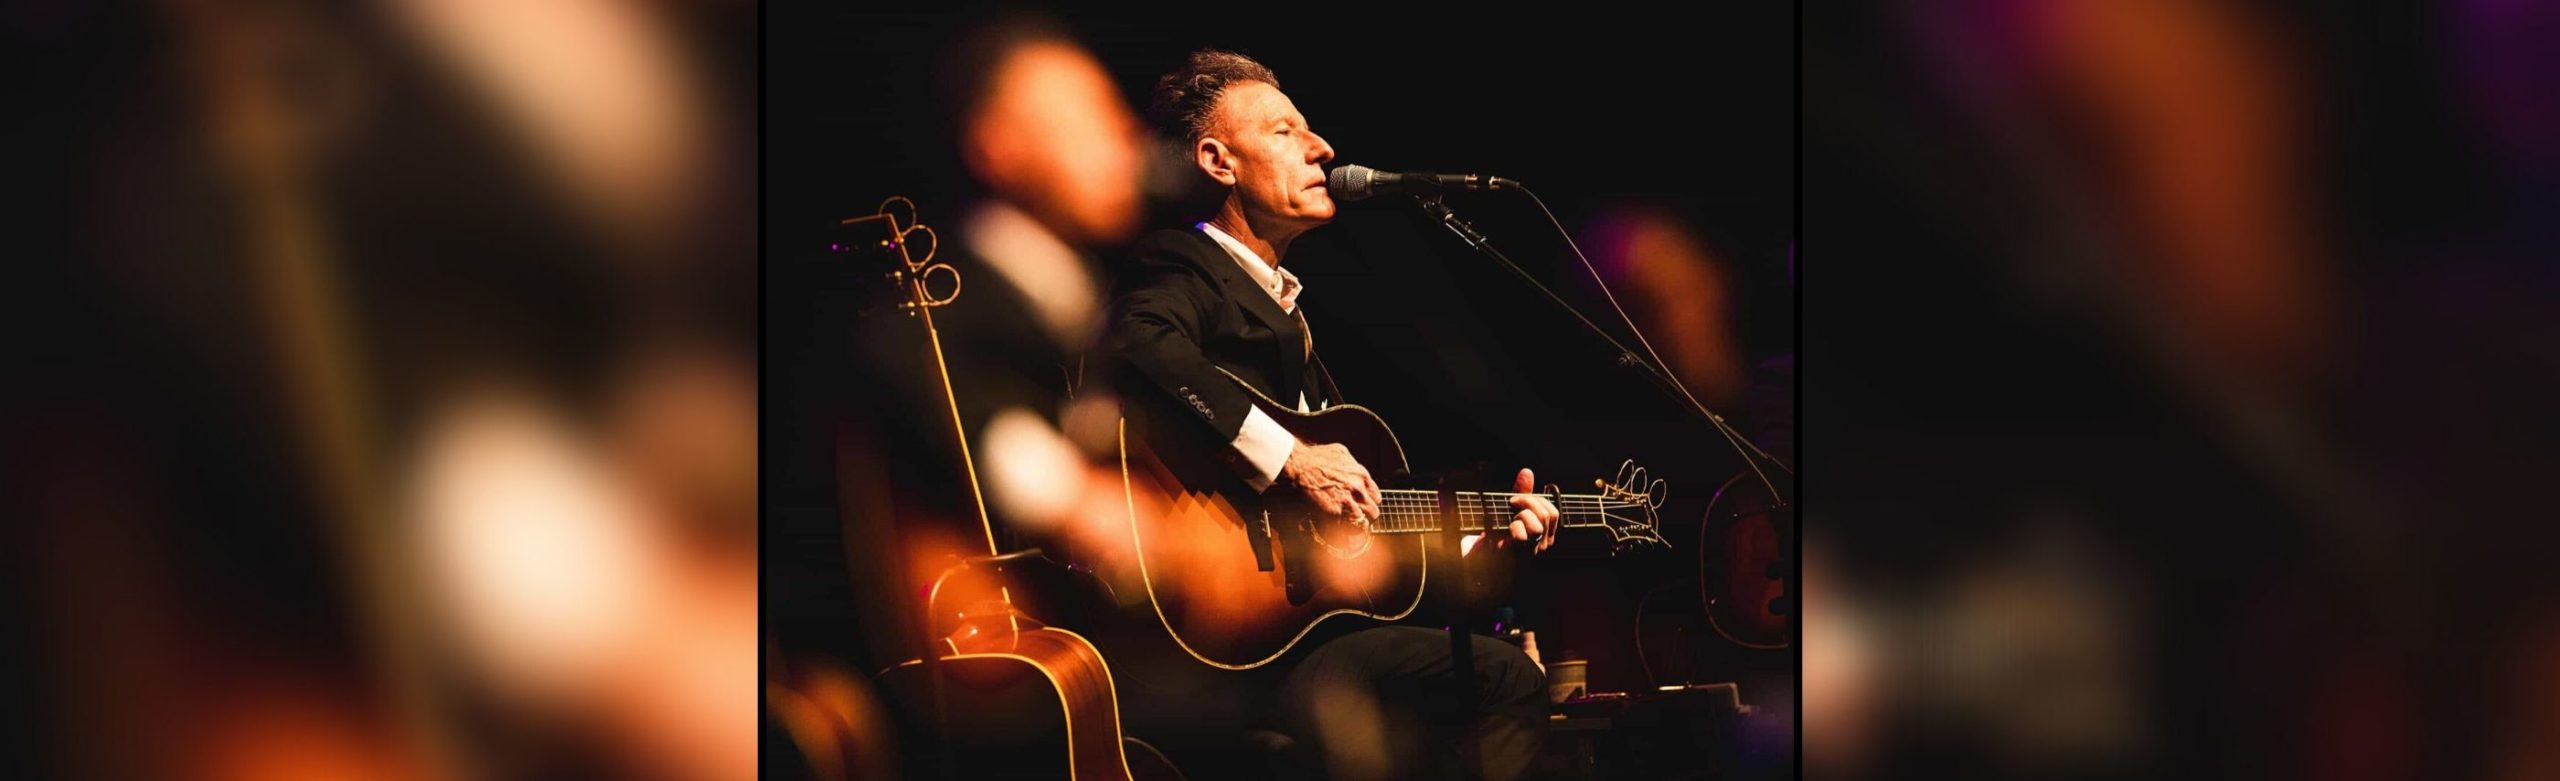 Lyle Lovett Plans Return to Missoula with His Acoustic Group Image